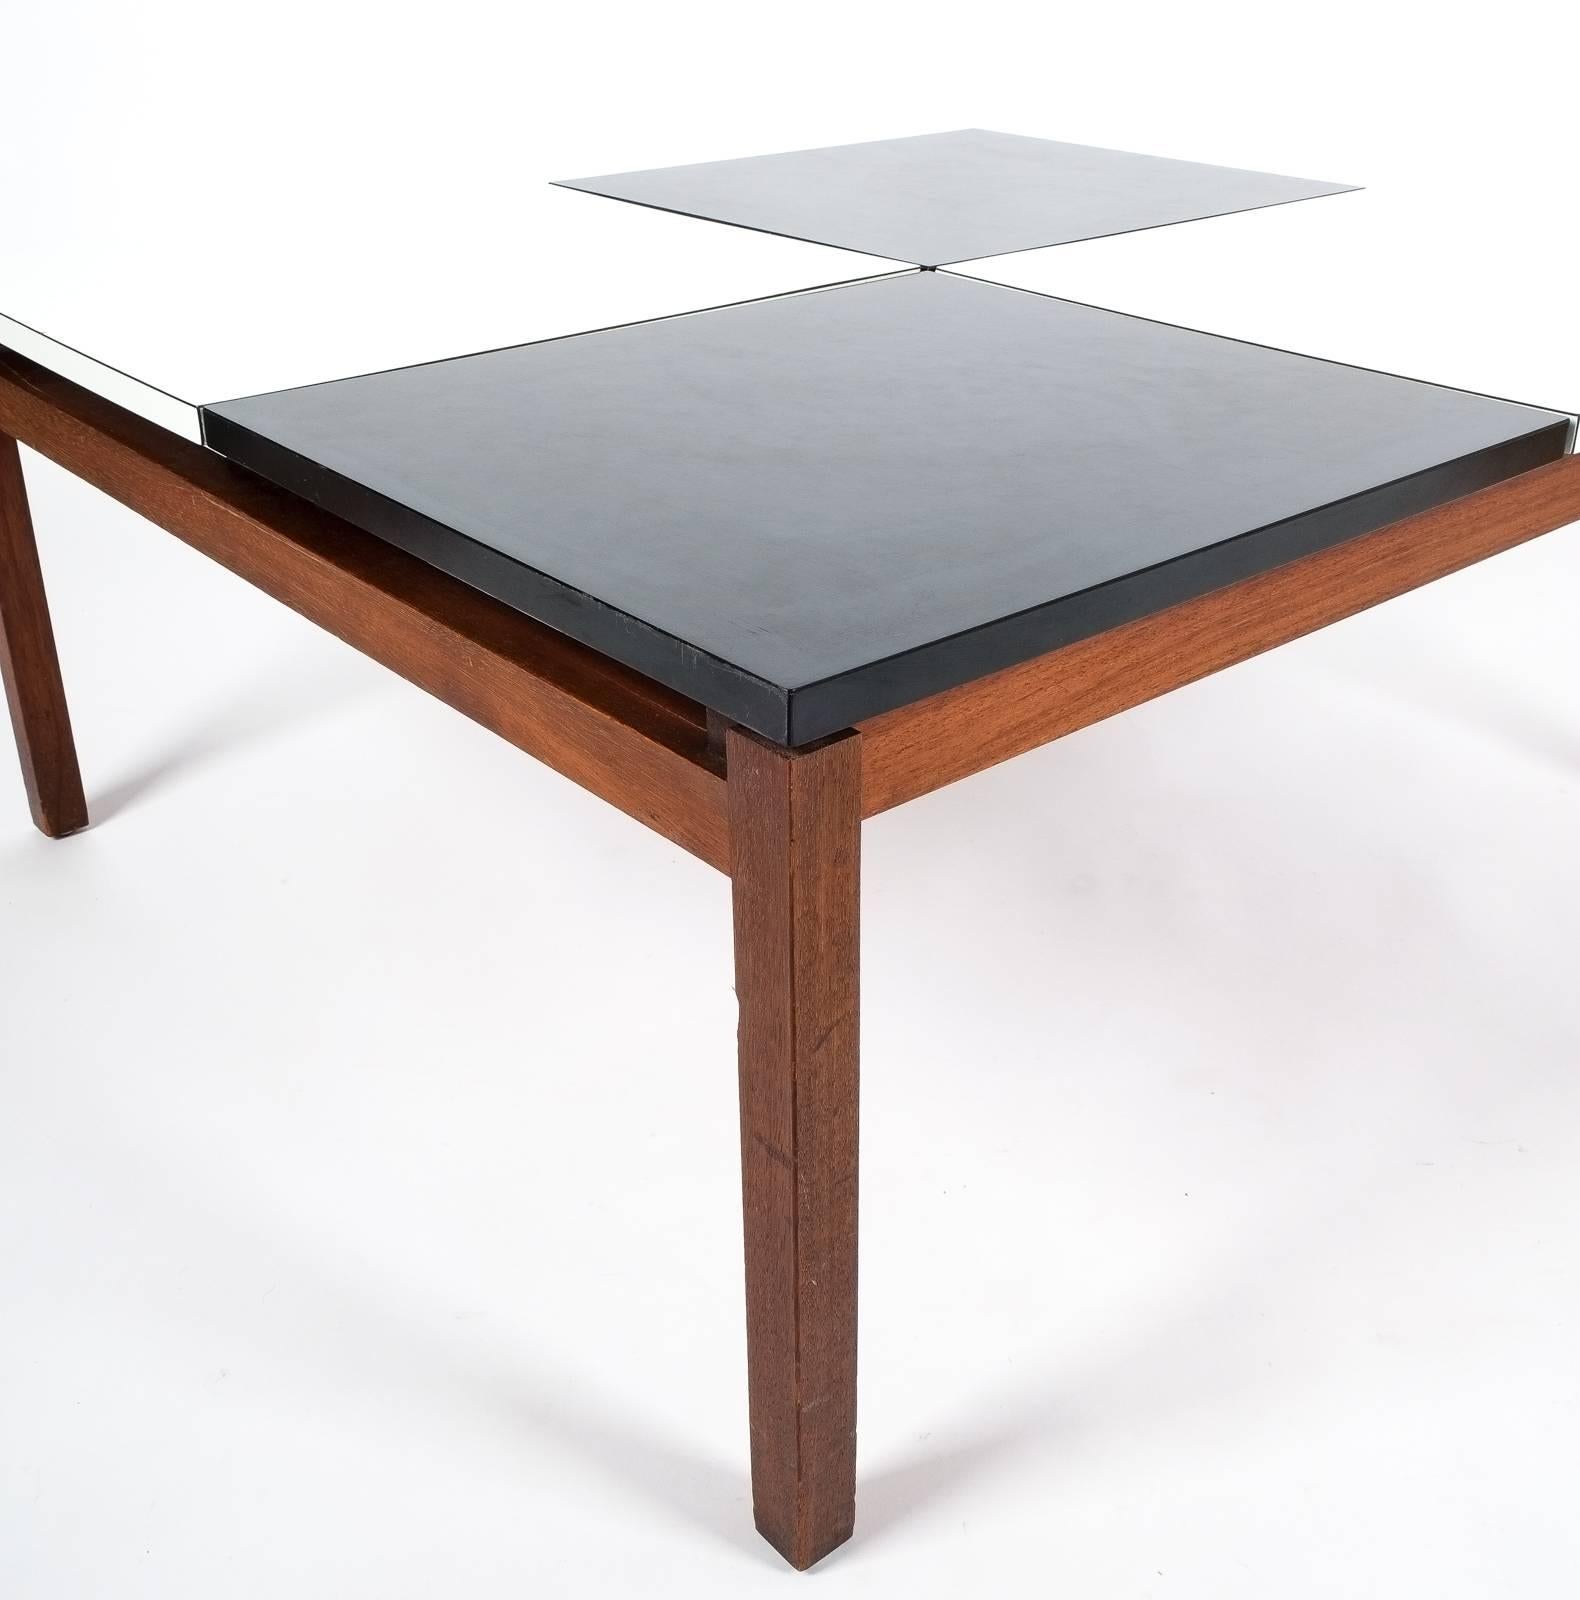 Lewis Butler Black and White Coffee Table Walnut Wood Base, Knoll, 1960 For Sale 1